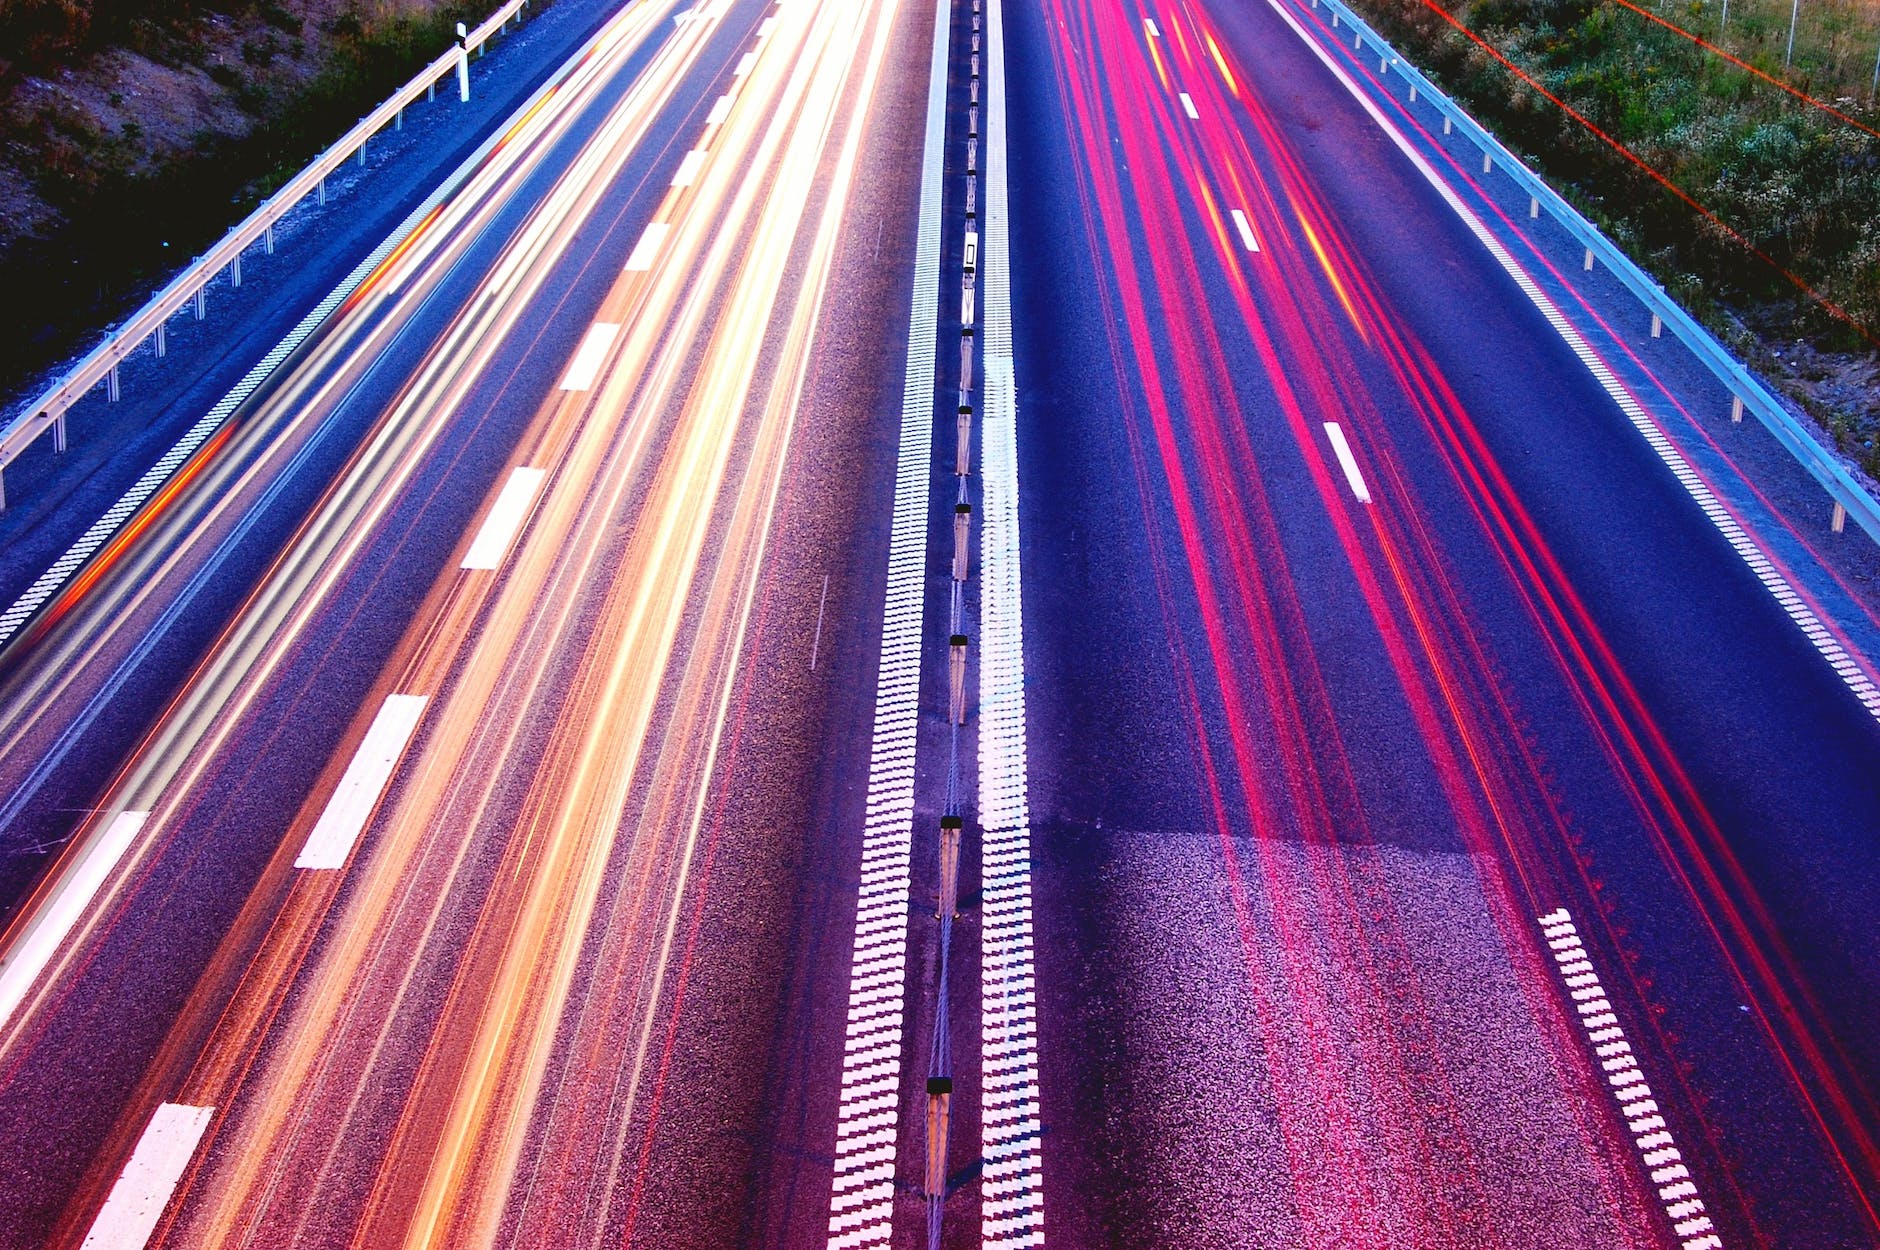 time lapse photography of road